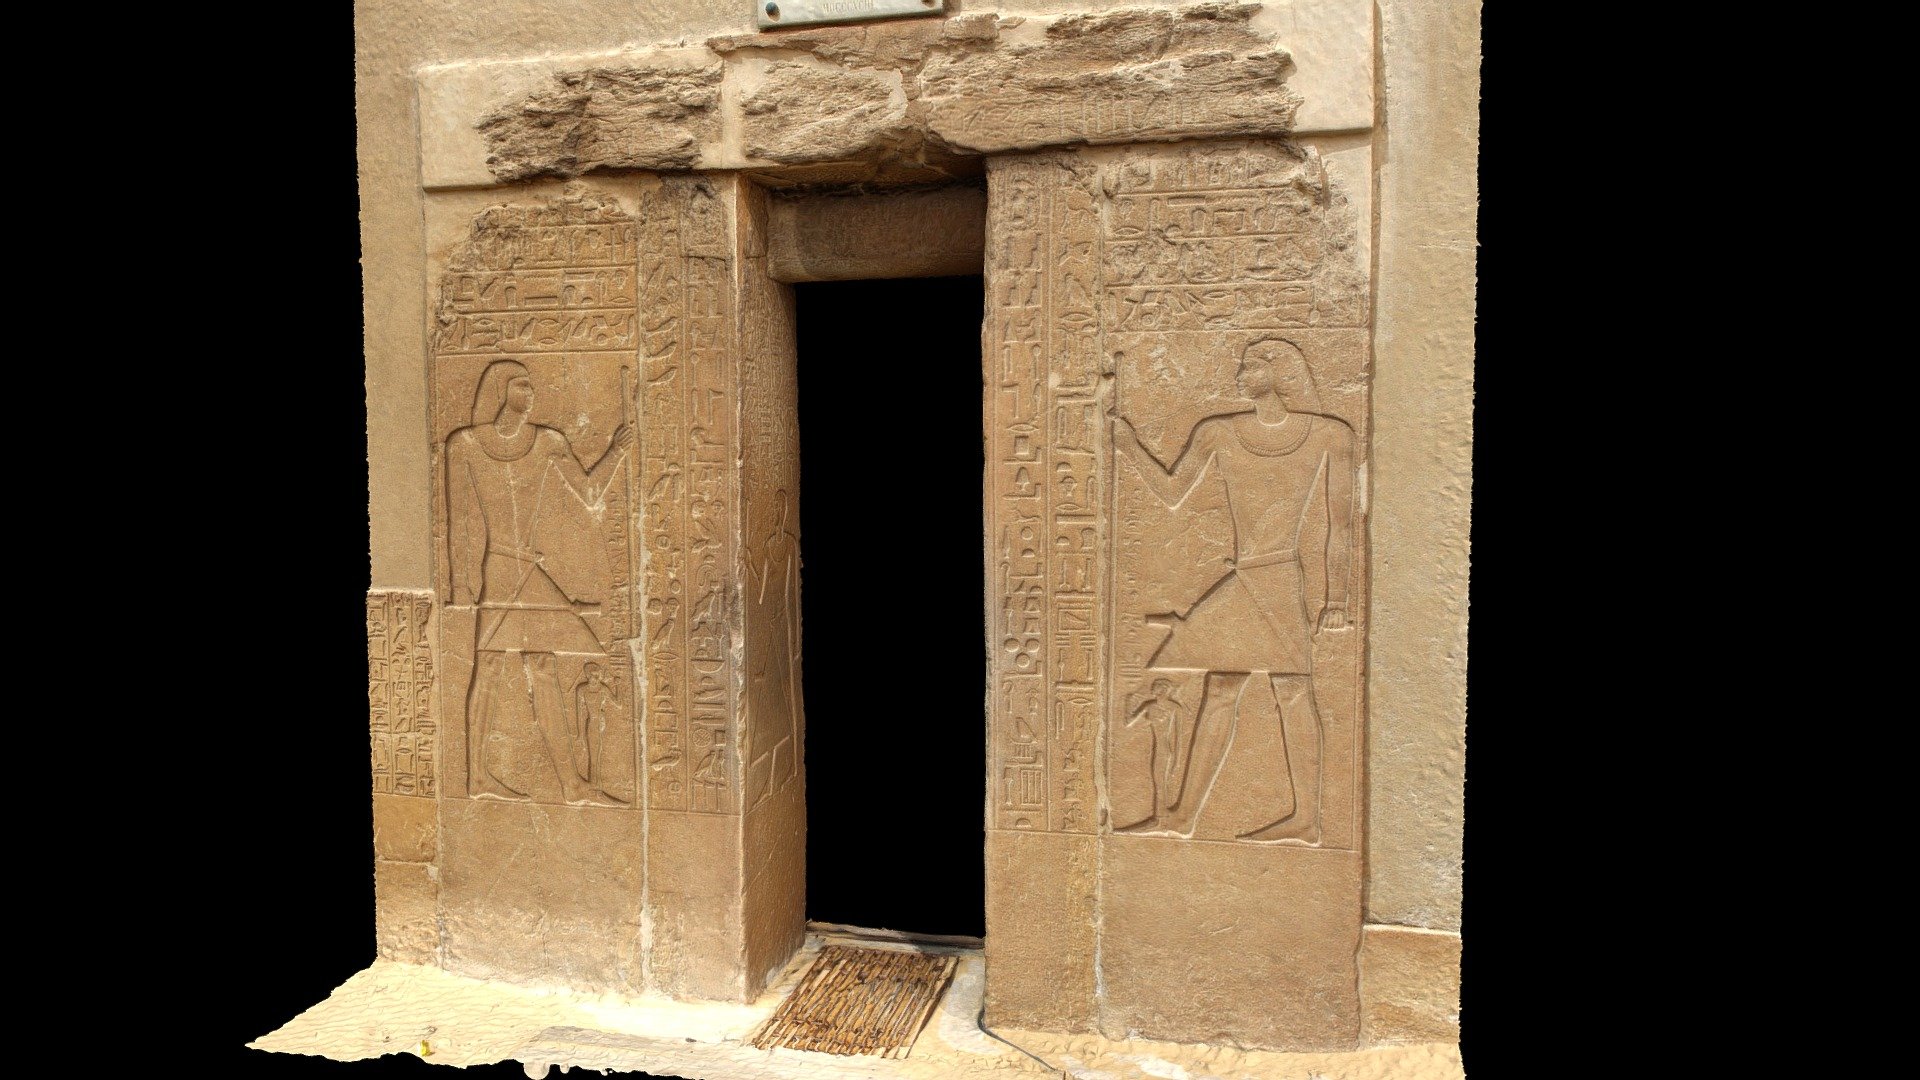 Entrance to the Mastaba of Mereruka in the necropolis of Saqqara, Egypt.  Mereruka was a vizer of Egypt during Dynasty VI.

Created from 47 photographs (Canon EOS Rebel T5i, 18MP) using Metashape 1.5.1.  Photographed March 16, 2019 3d model